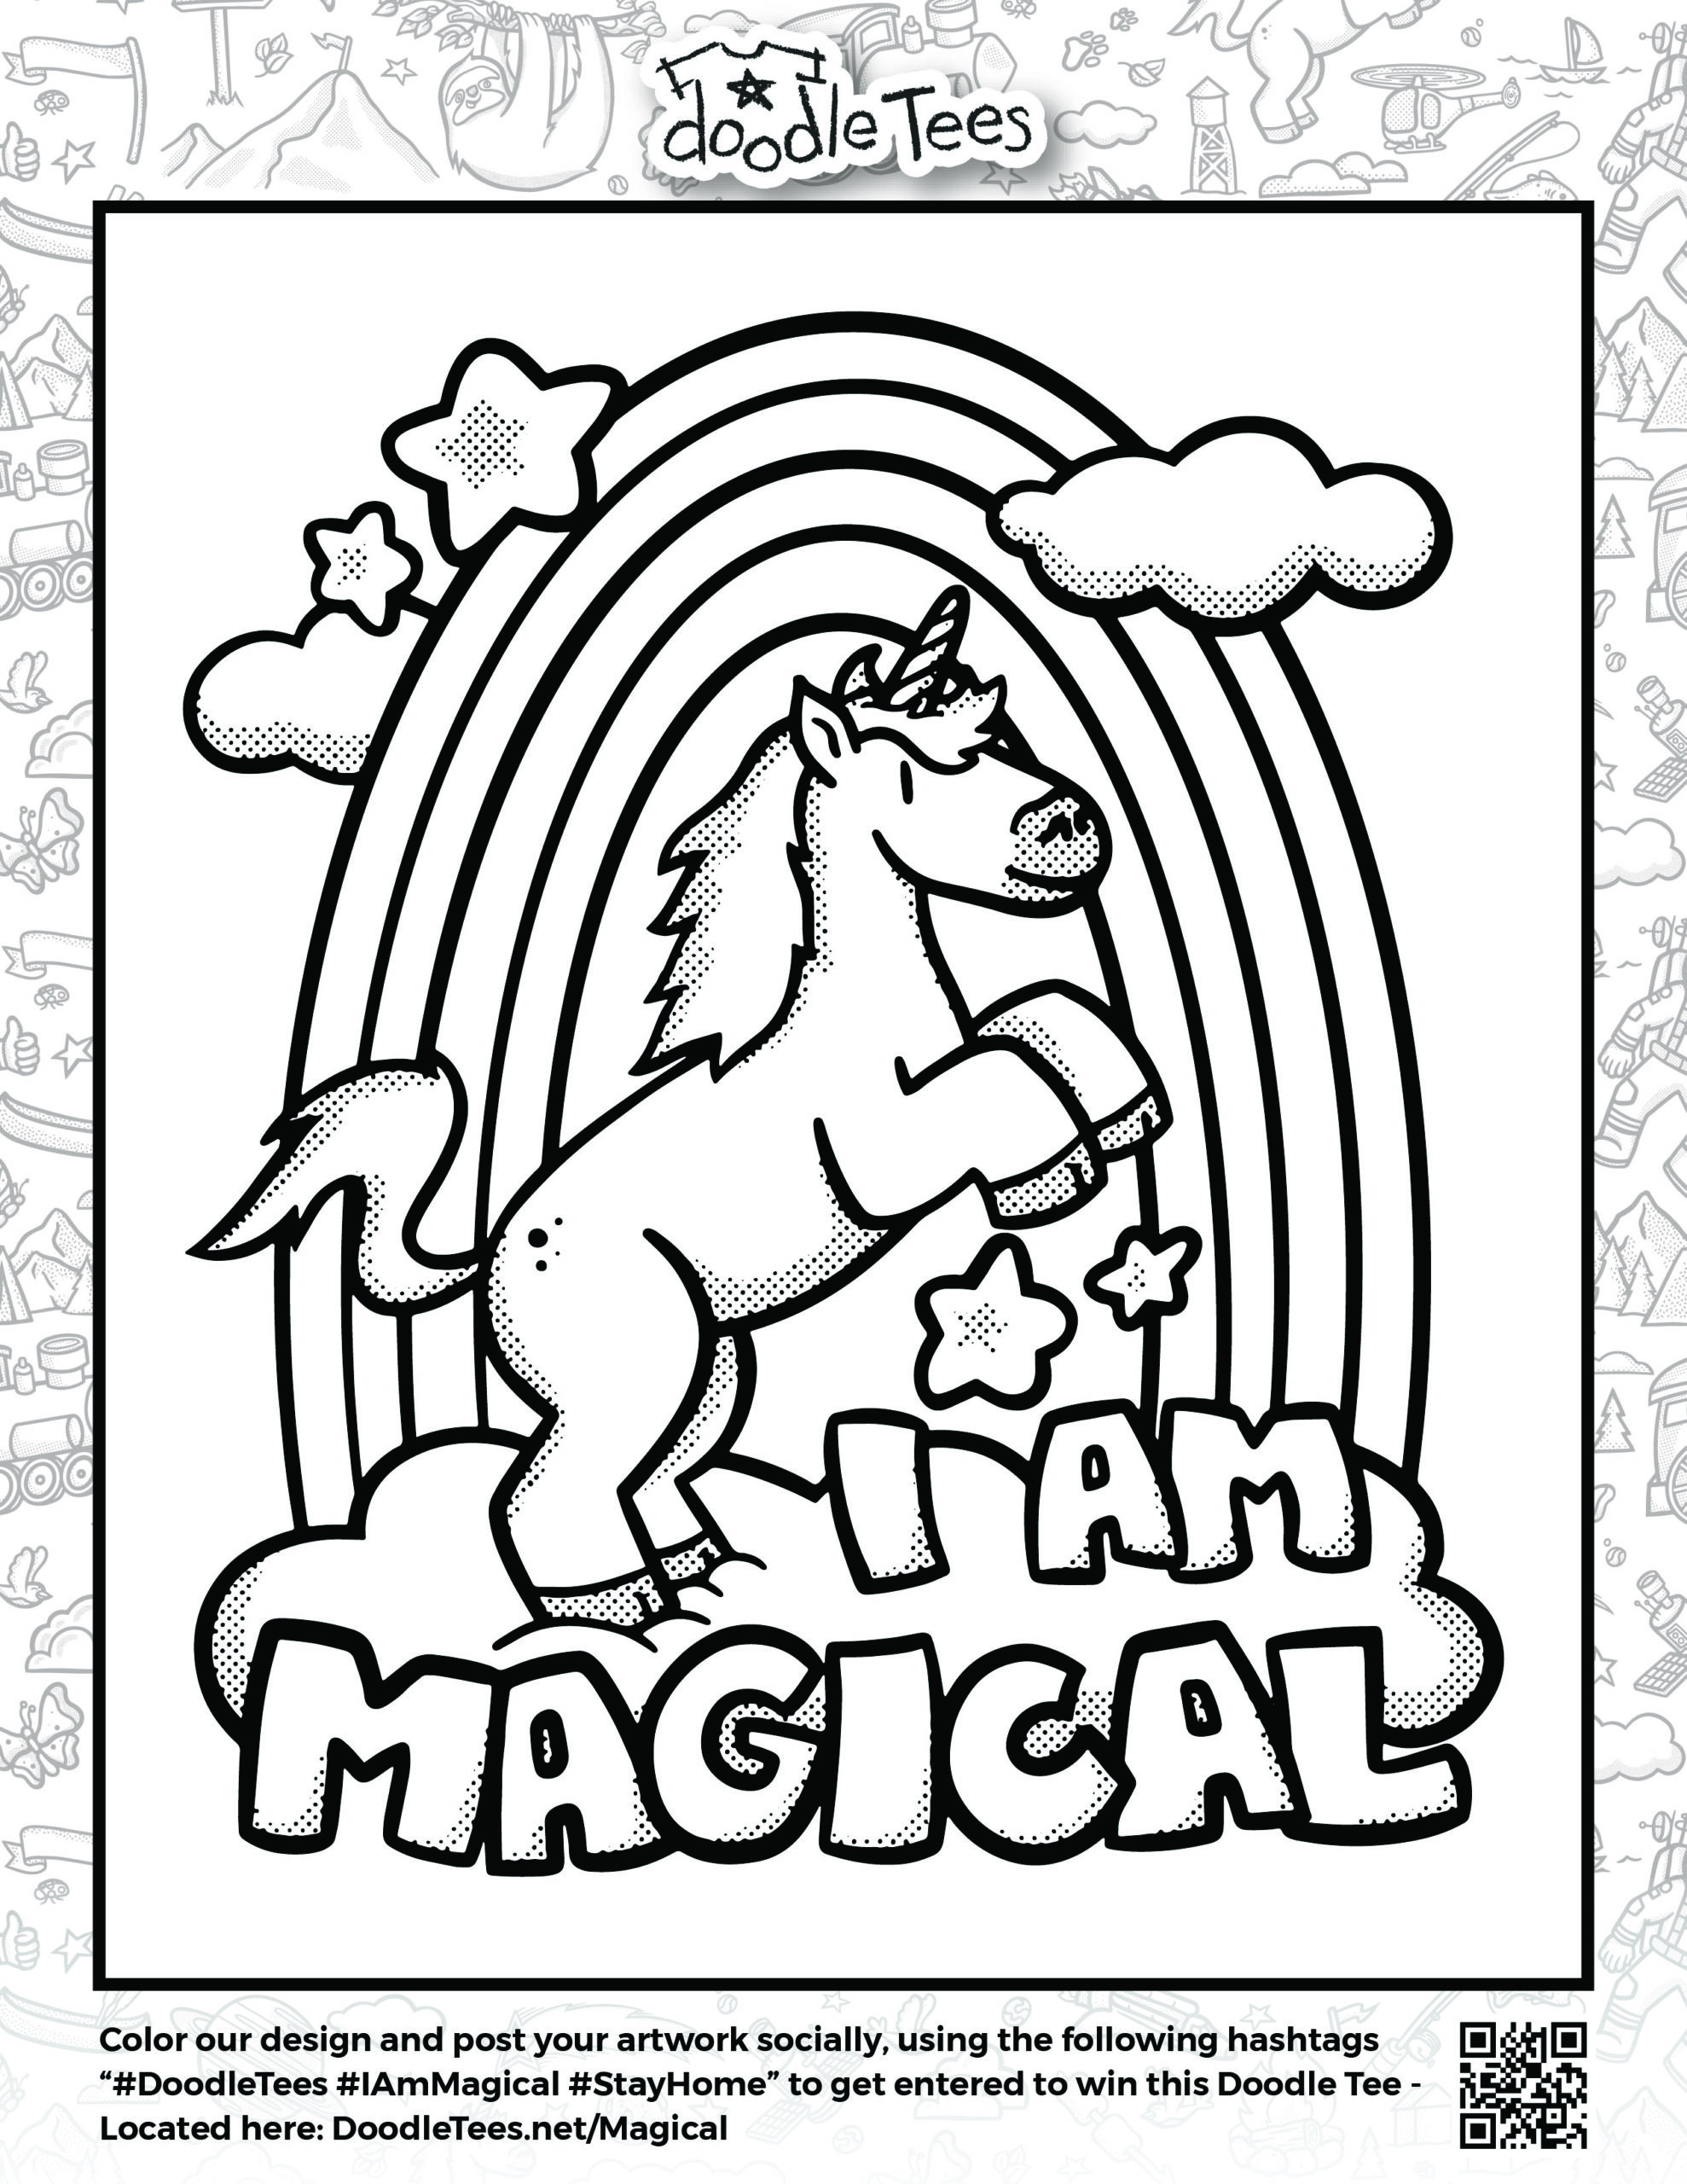 "Doodle Tees 'I Am Magical' unicorn, rainbow and clouds design to download and print at home"